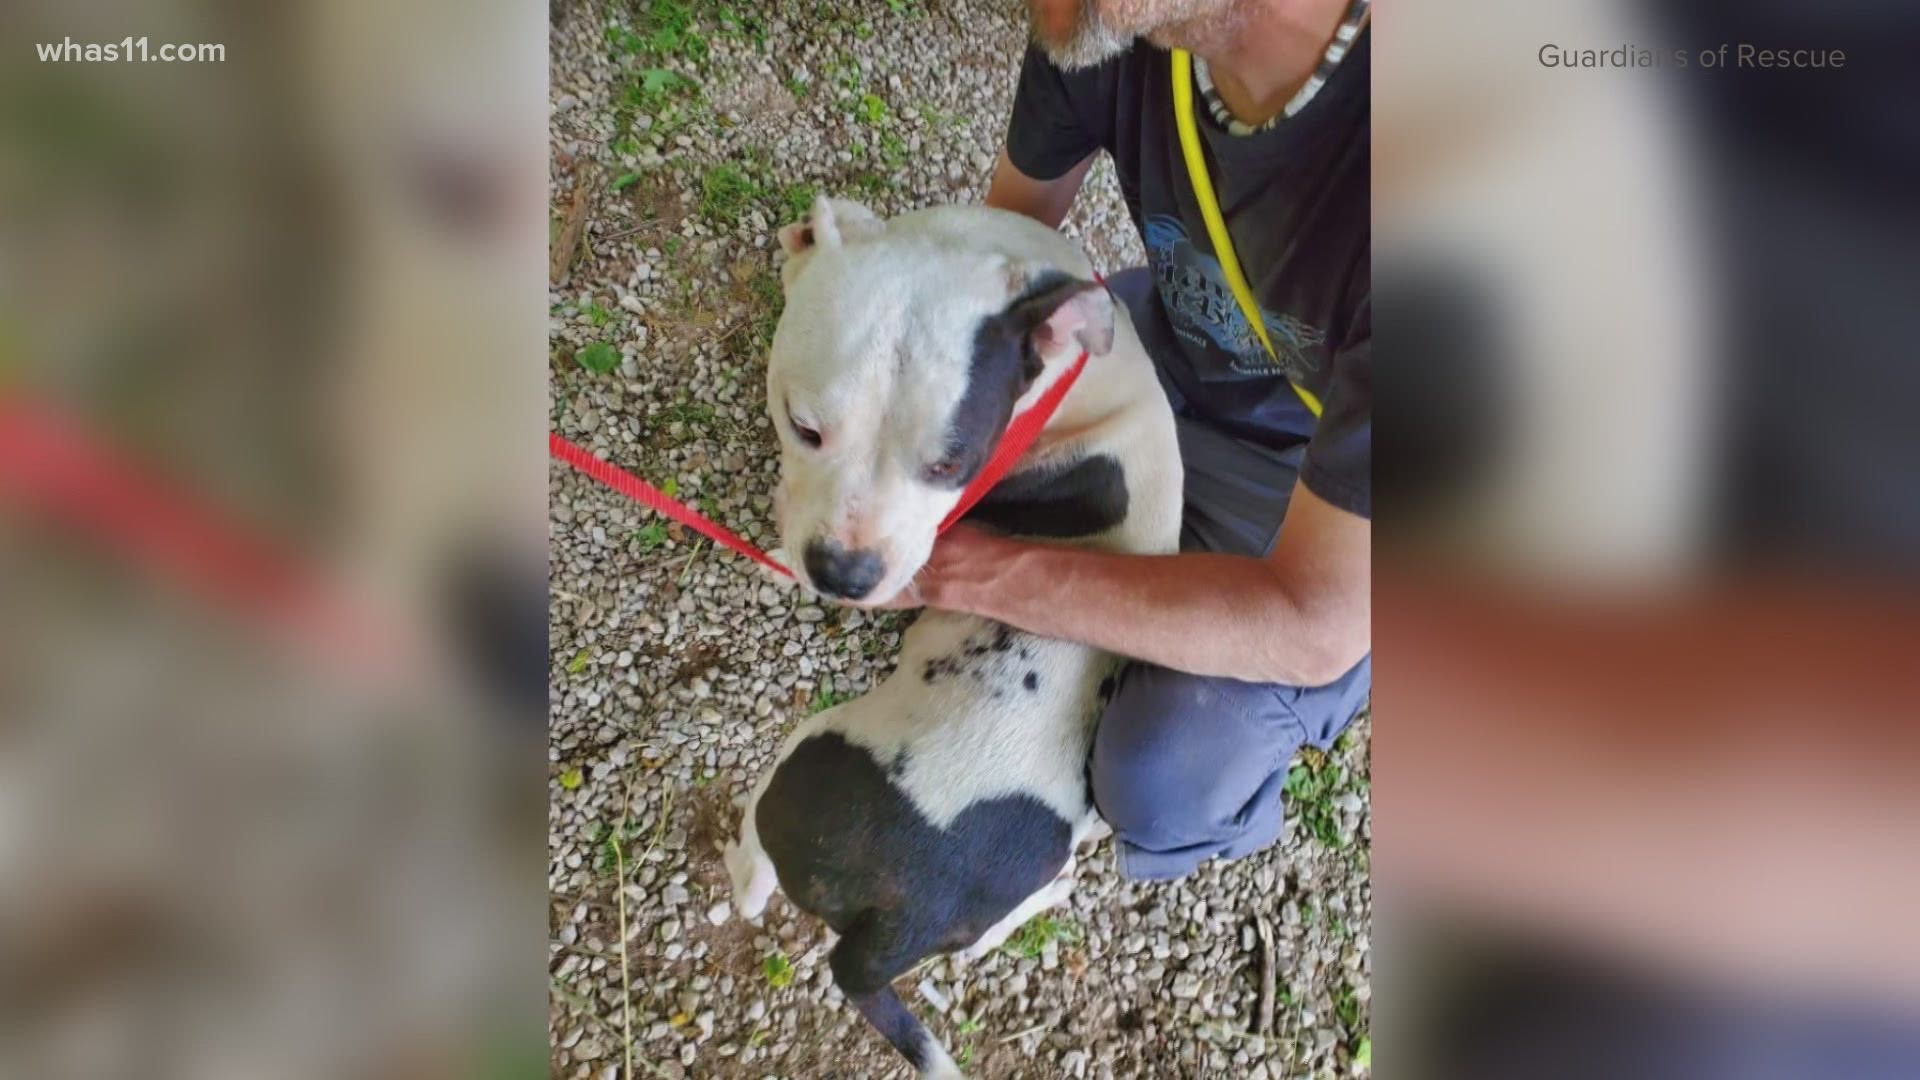 Tyson was found after Guardians of Rescue acted on a tip about a hoarding situation in Hart County. Rescuers said they found more than 80 dogs at the site.